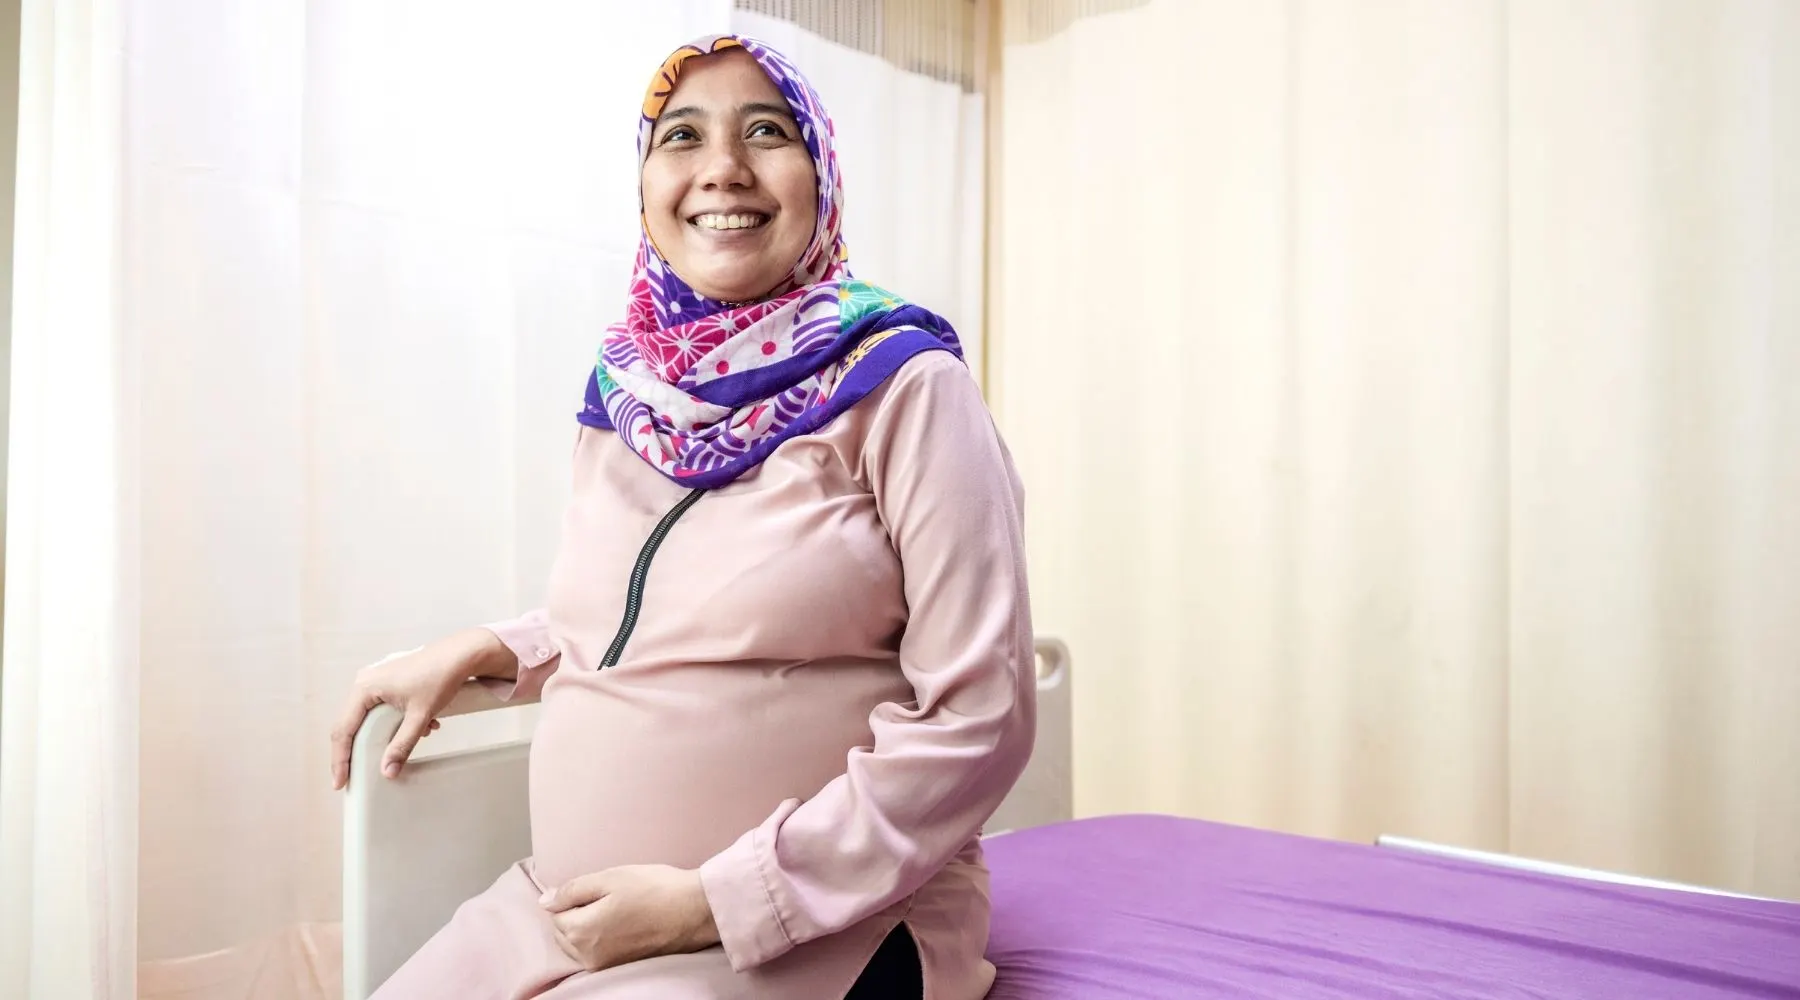 A pregnant lady wearing a religious headscarf sits on a hospital bed.